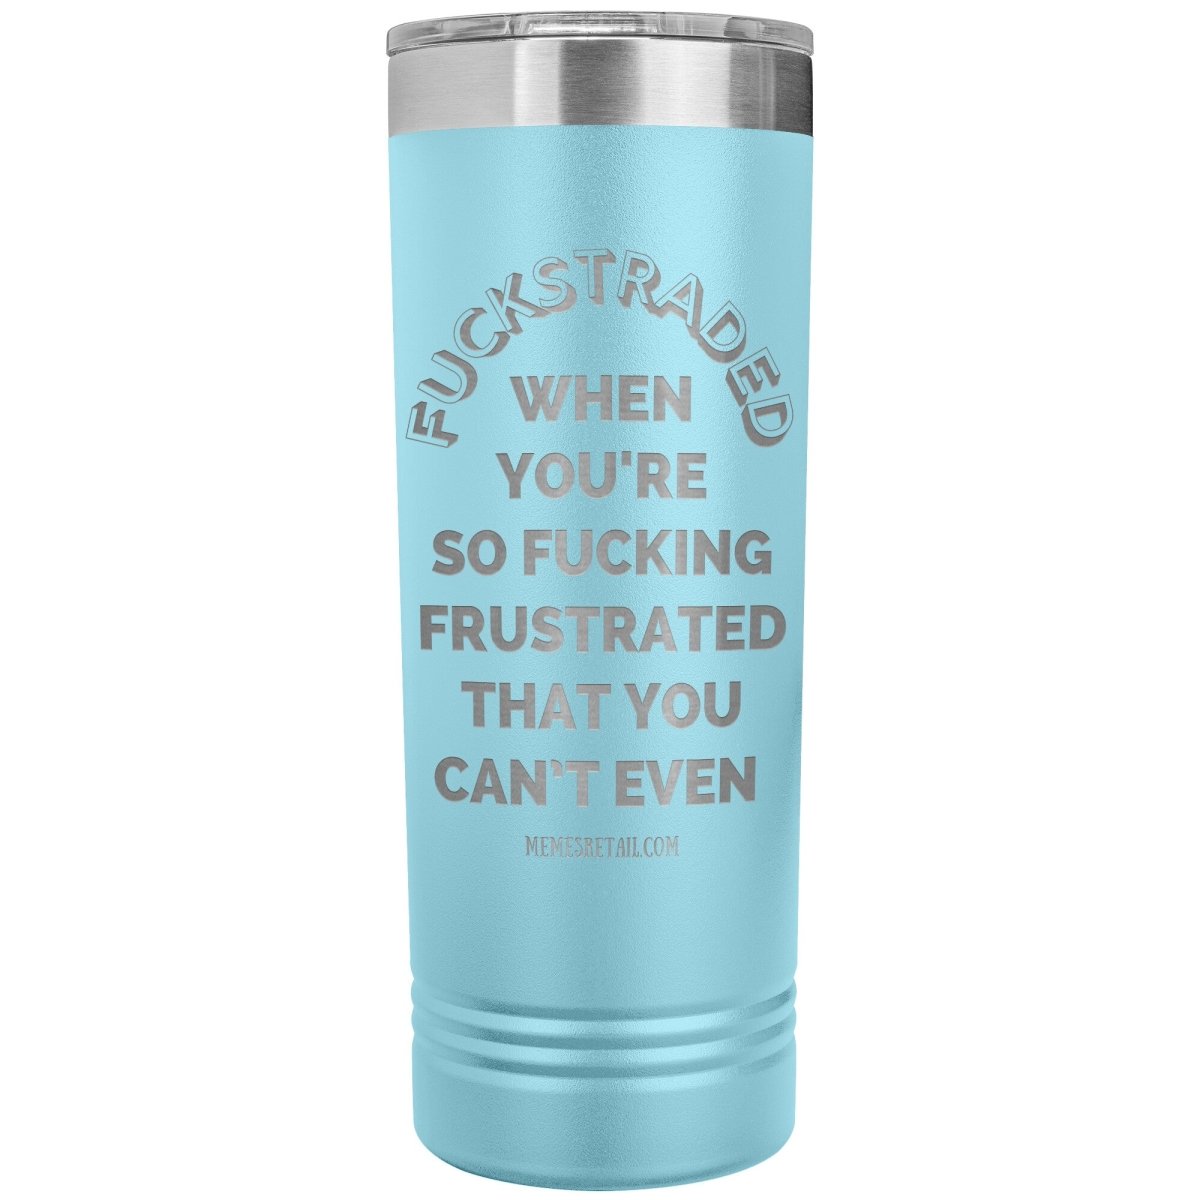 Fuckstraded, When You're So Fucking Frustrated That You Can’t Even - 22oz Skinny Tumblers, Light Blue - MemesRetail.com